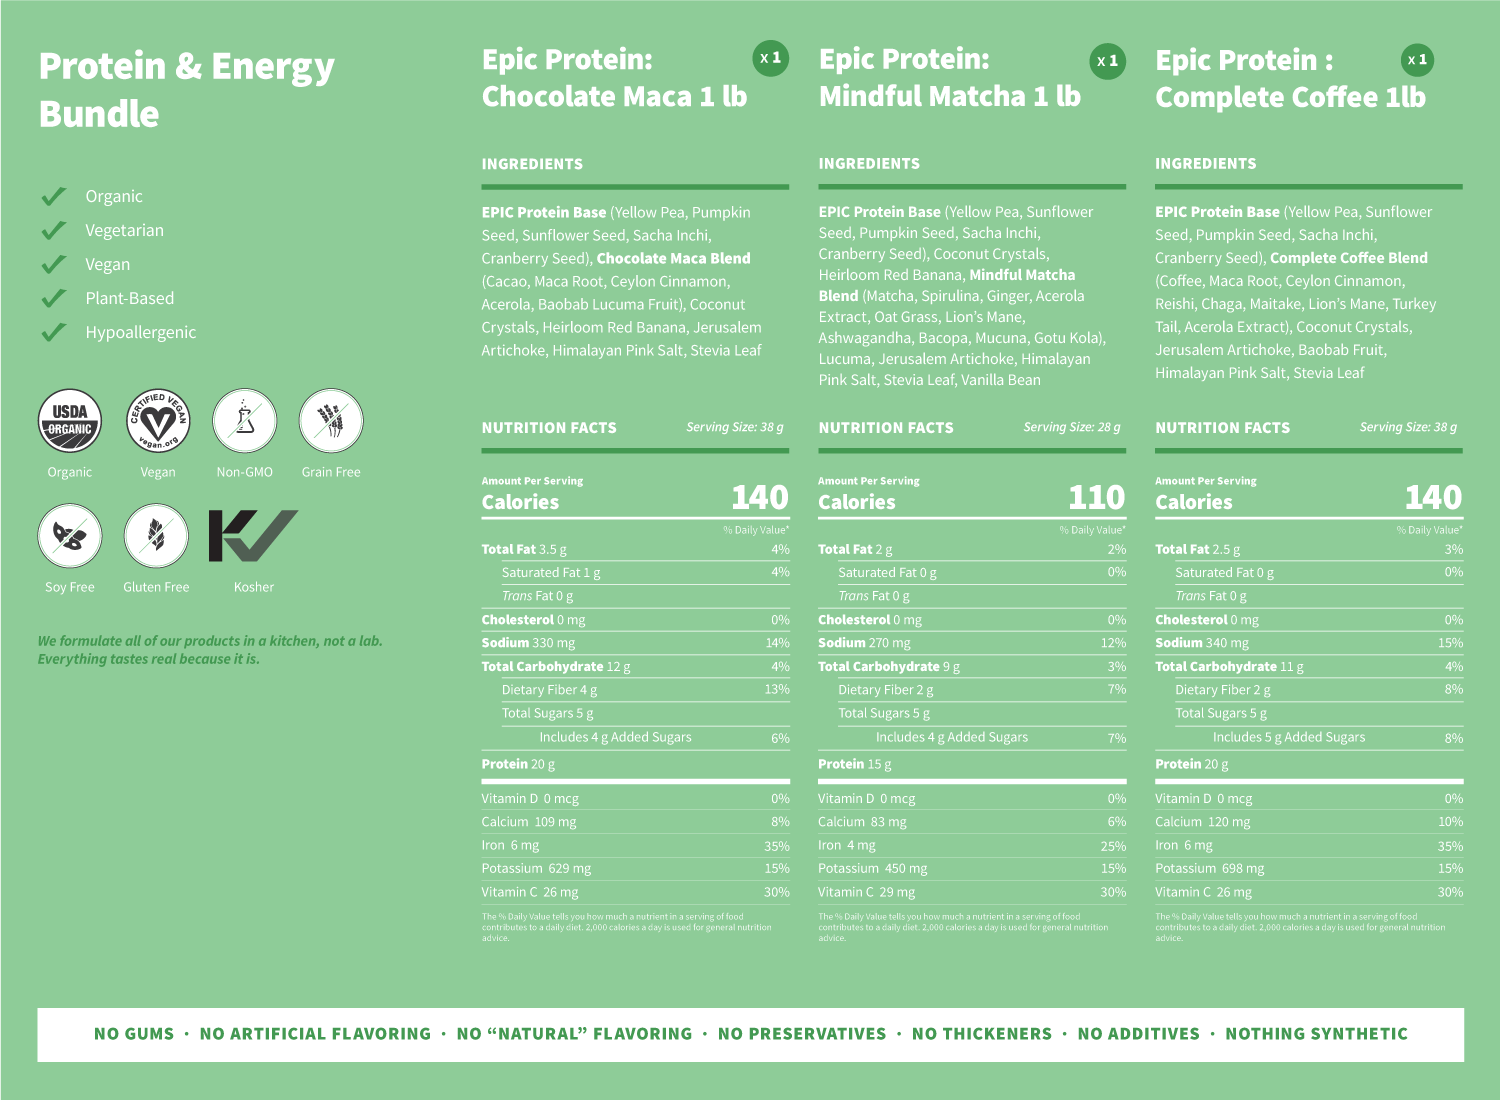 Protein & Energy Bundle Nutrition Facts